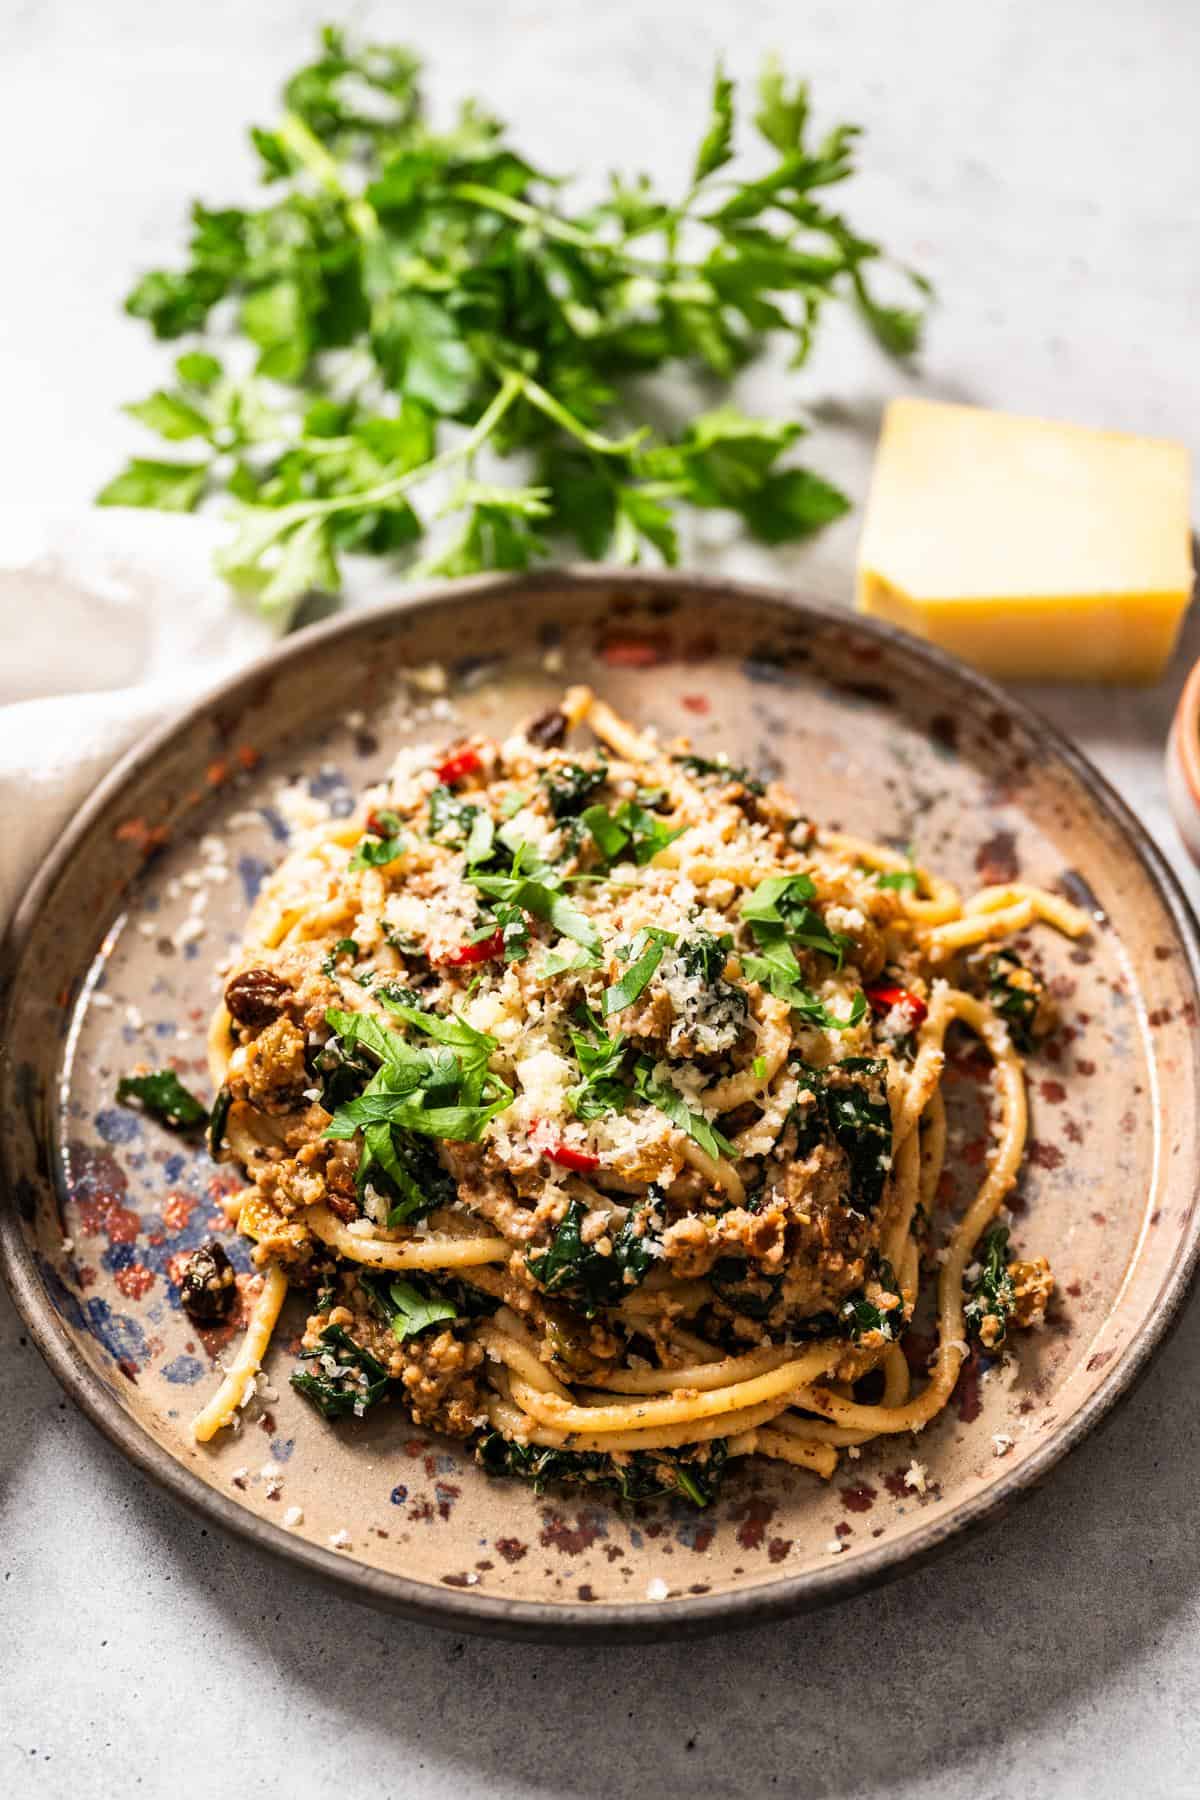 A Simple Pasta Dinner with Walnuts, Raisins and Kale